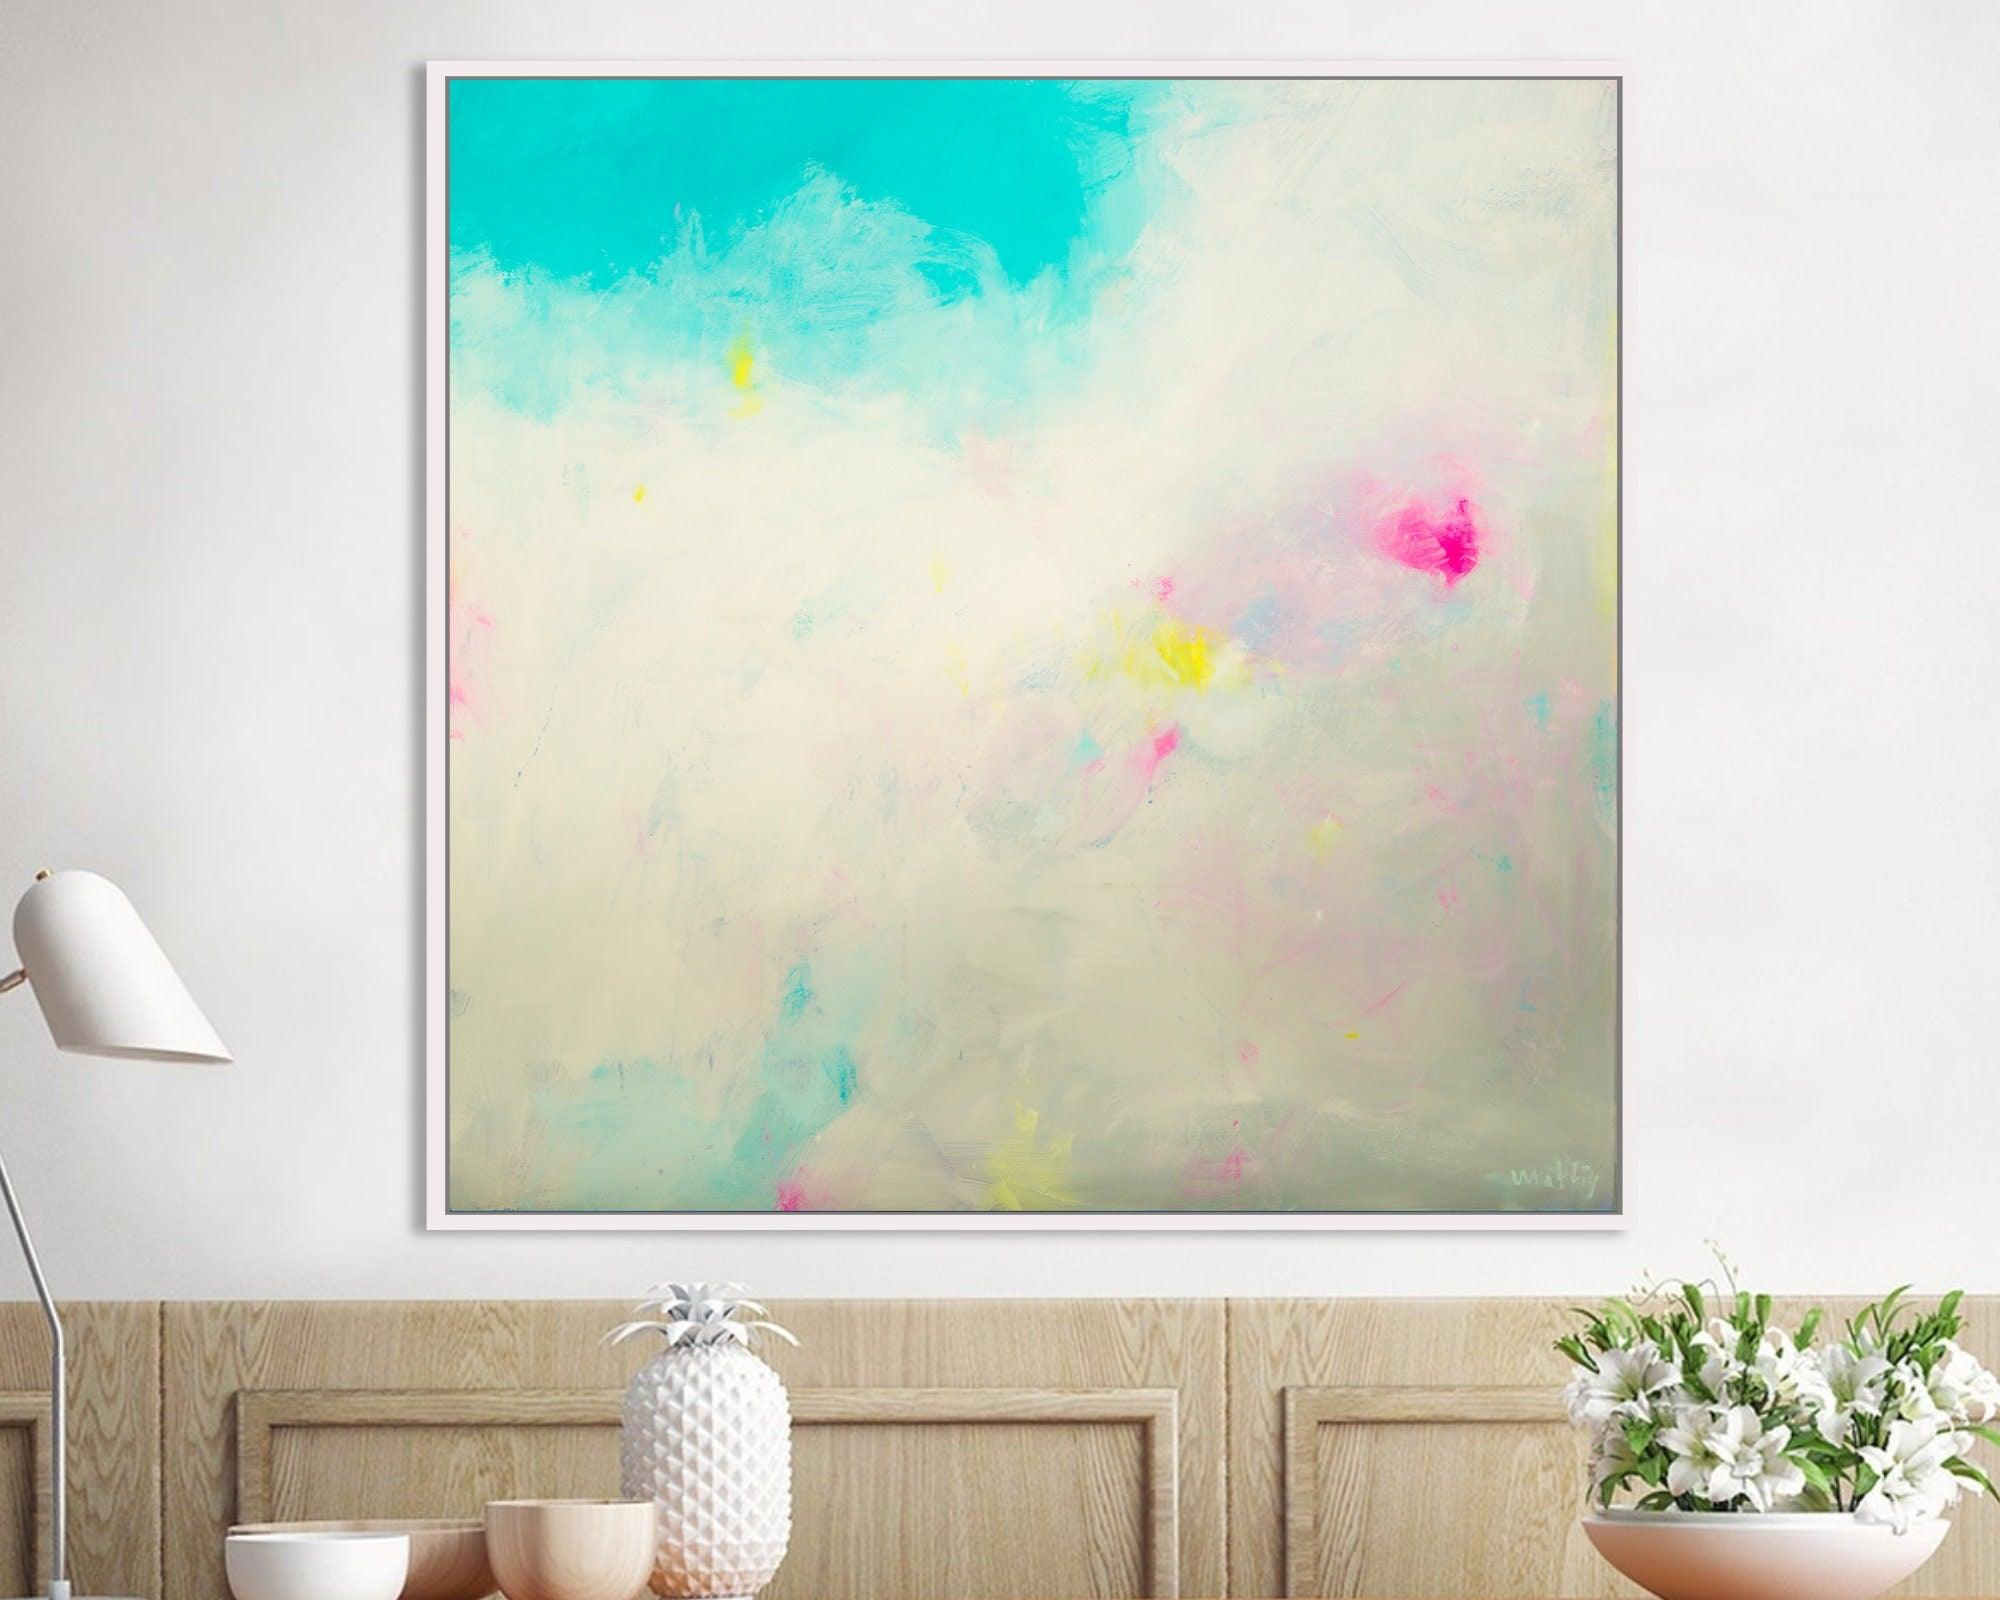 bright gallery large abstract painting, Abstract teal aqua blue wall art print, large original colorful art work